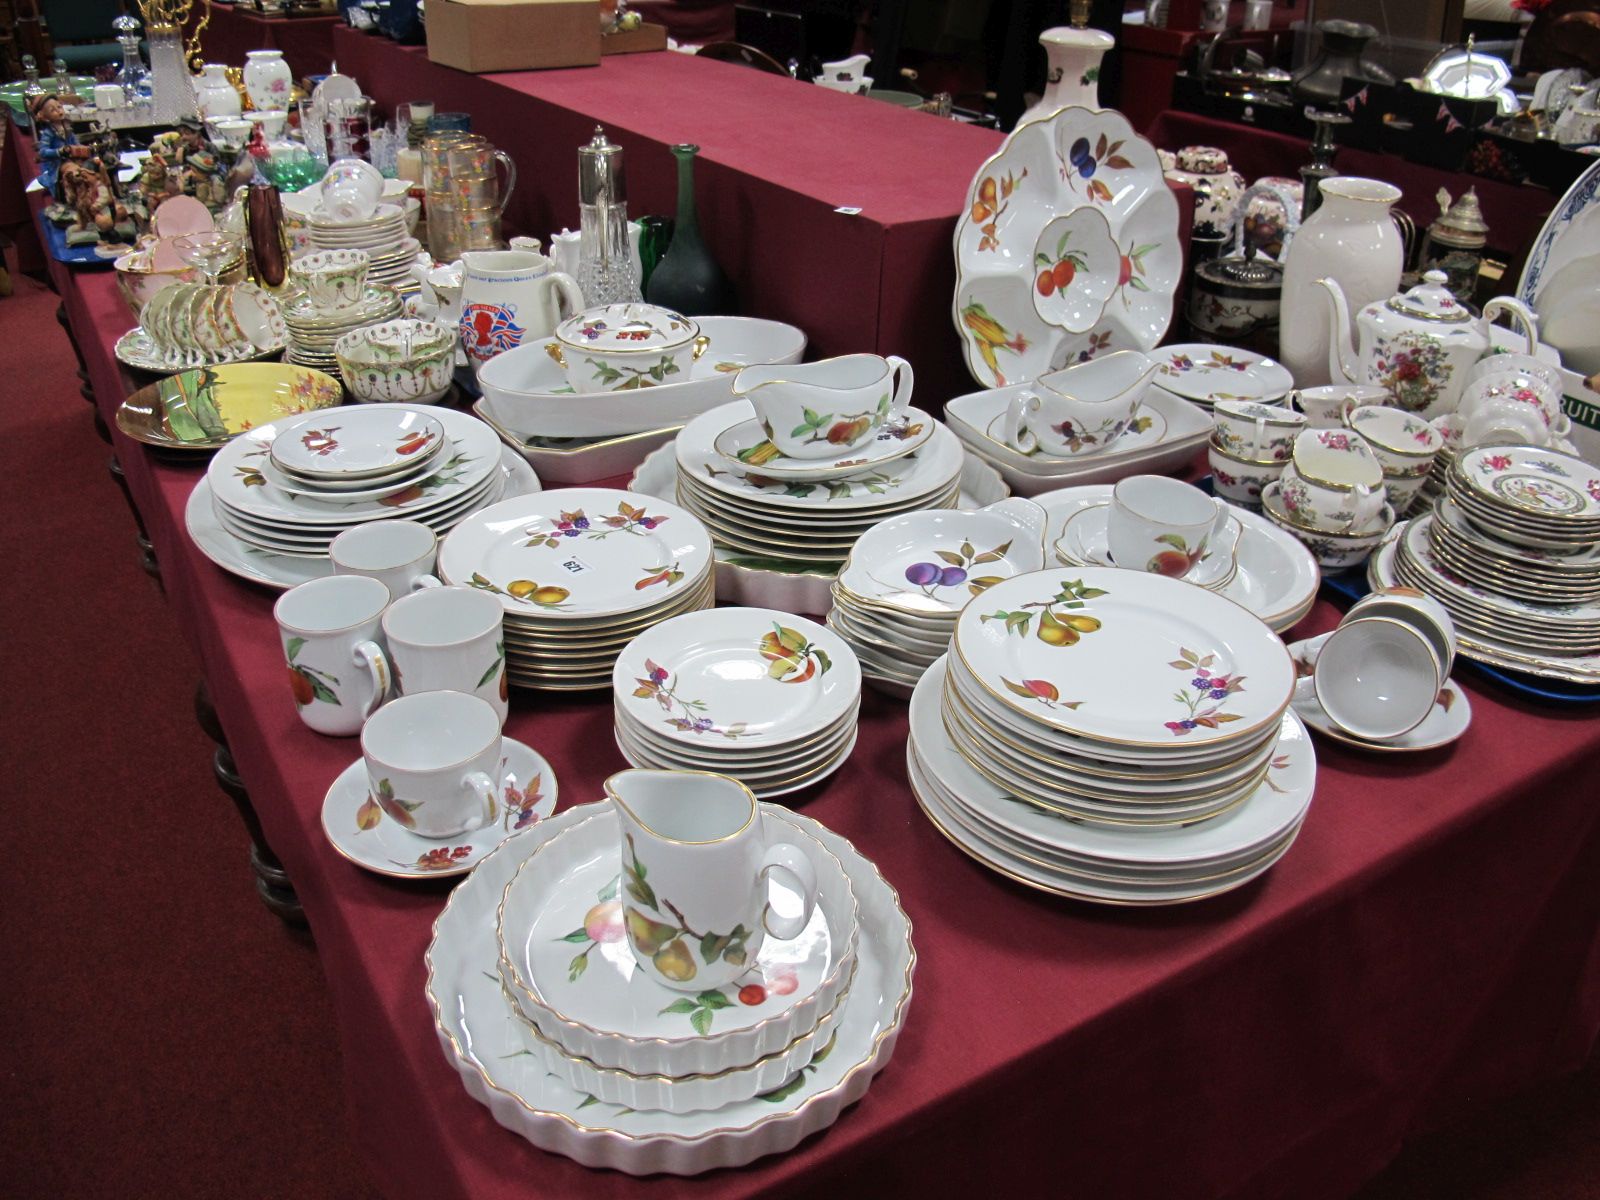 Royal Worcester "Evesham" Oven to Table Ware, of approximately eighty-two pieces.